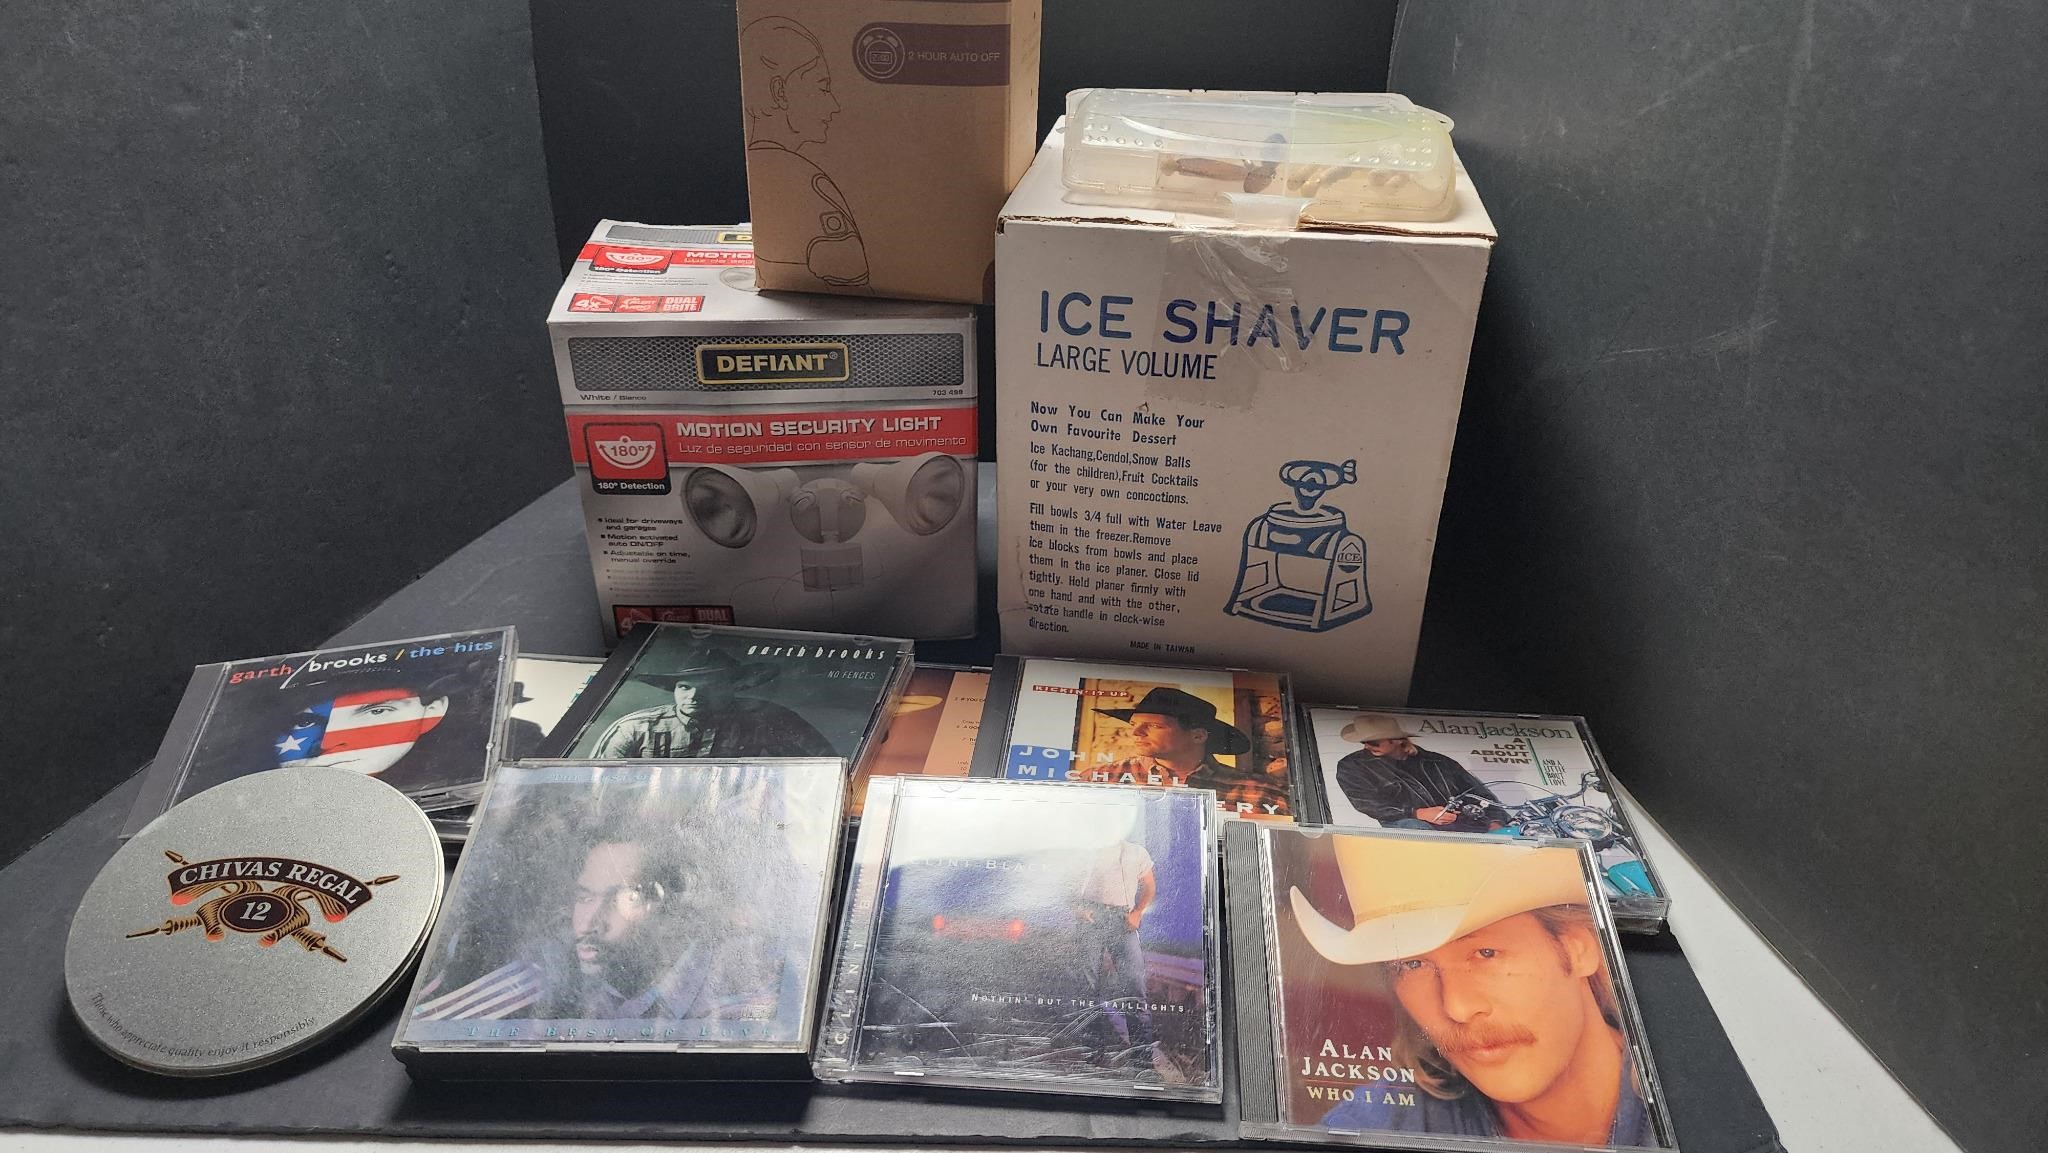 Security light, ice shaver and CD's